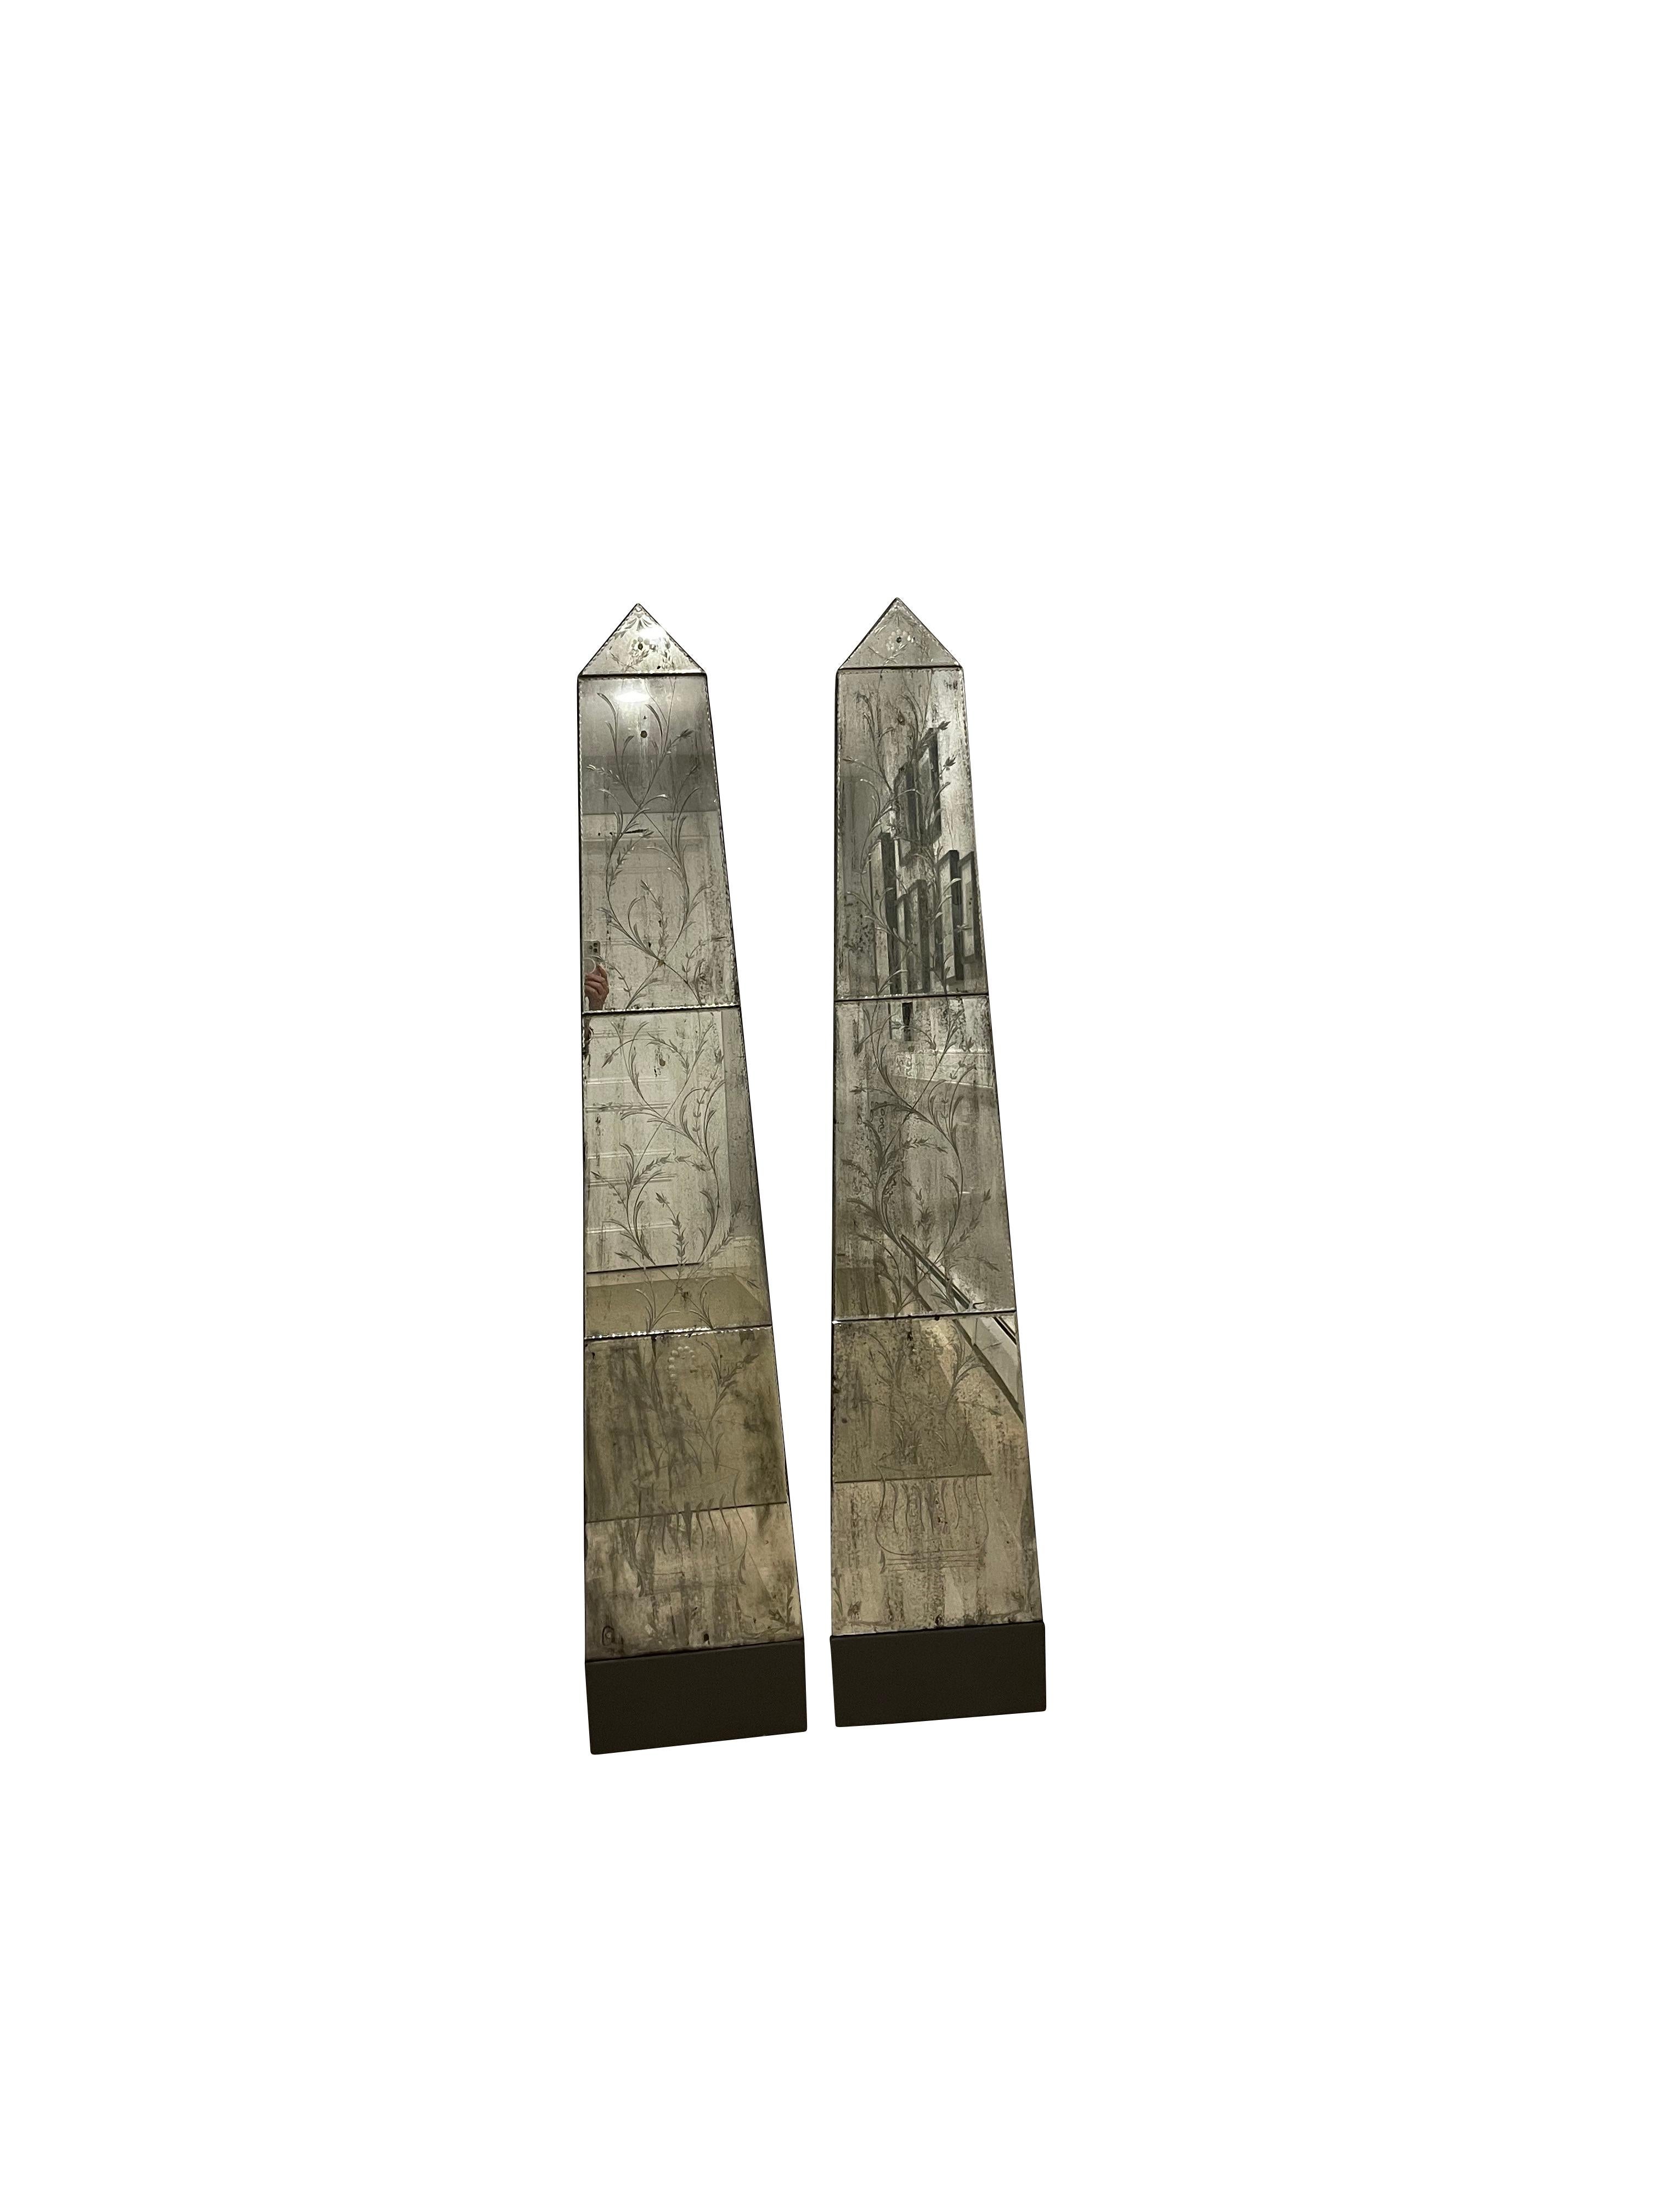 Pair of Obelisk Mirrored Panels with Botanical Etchings 4